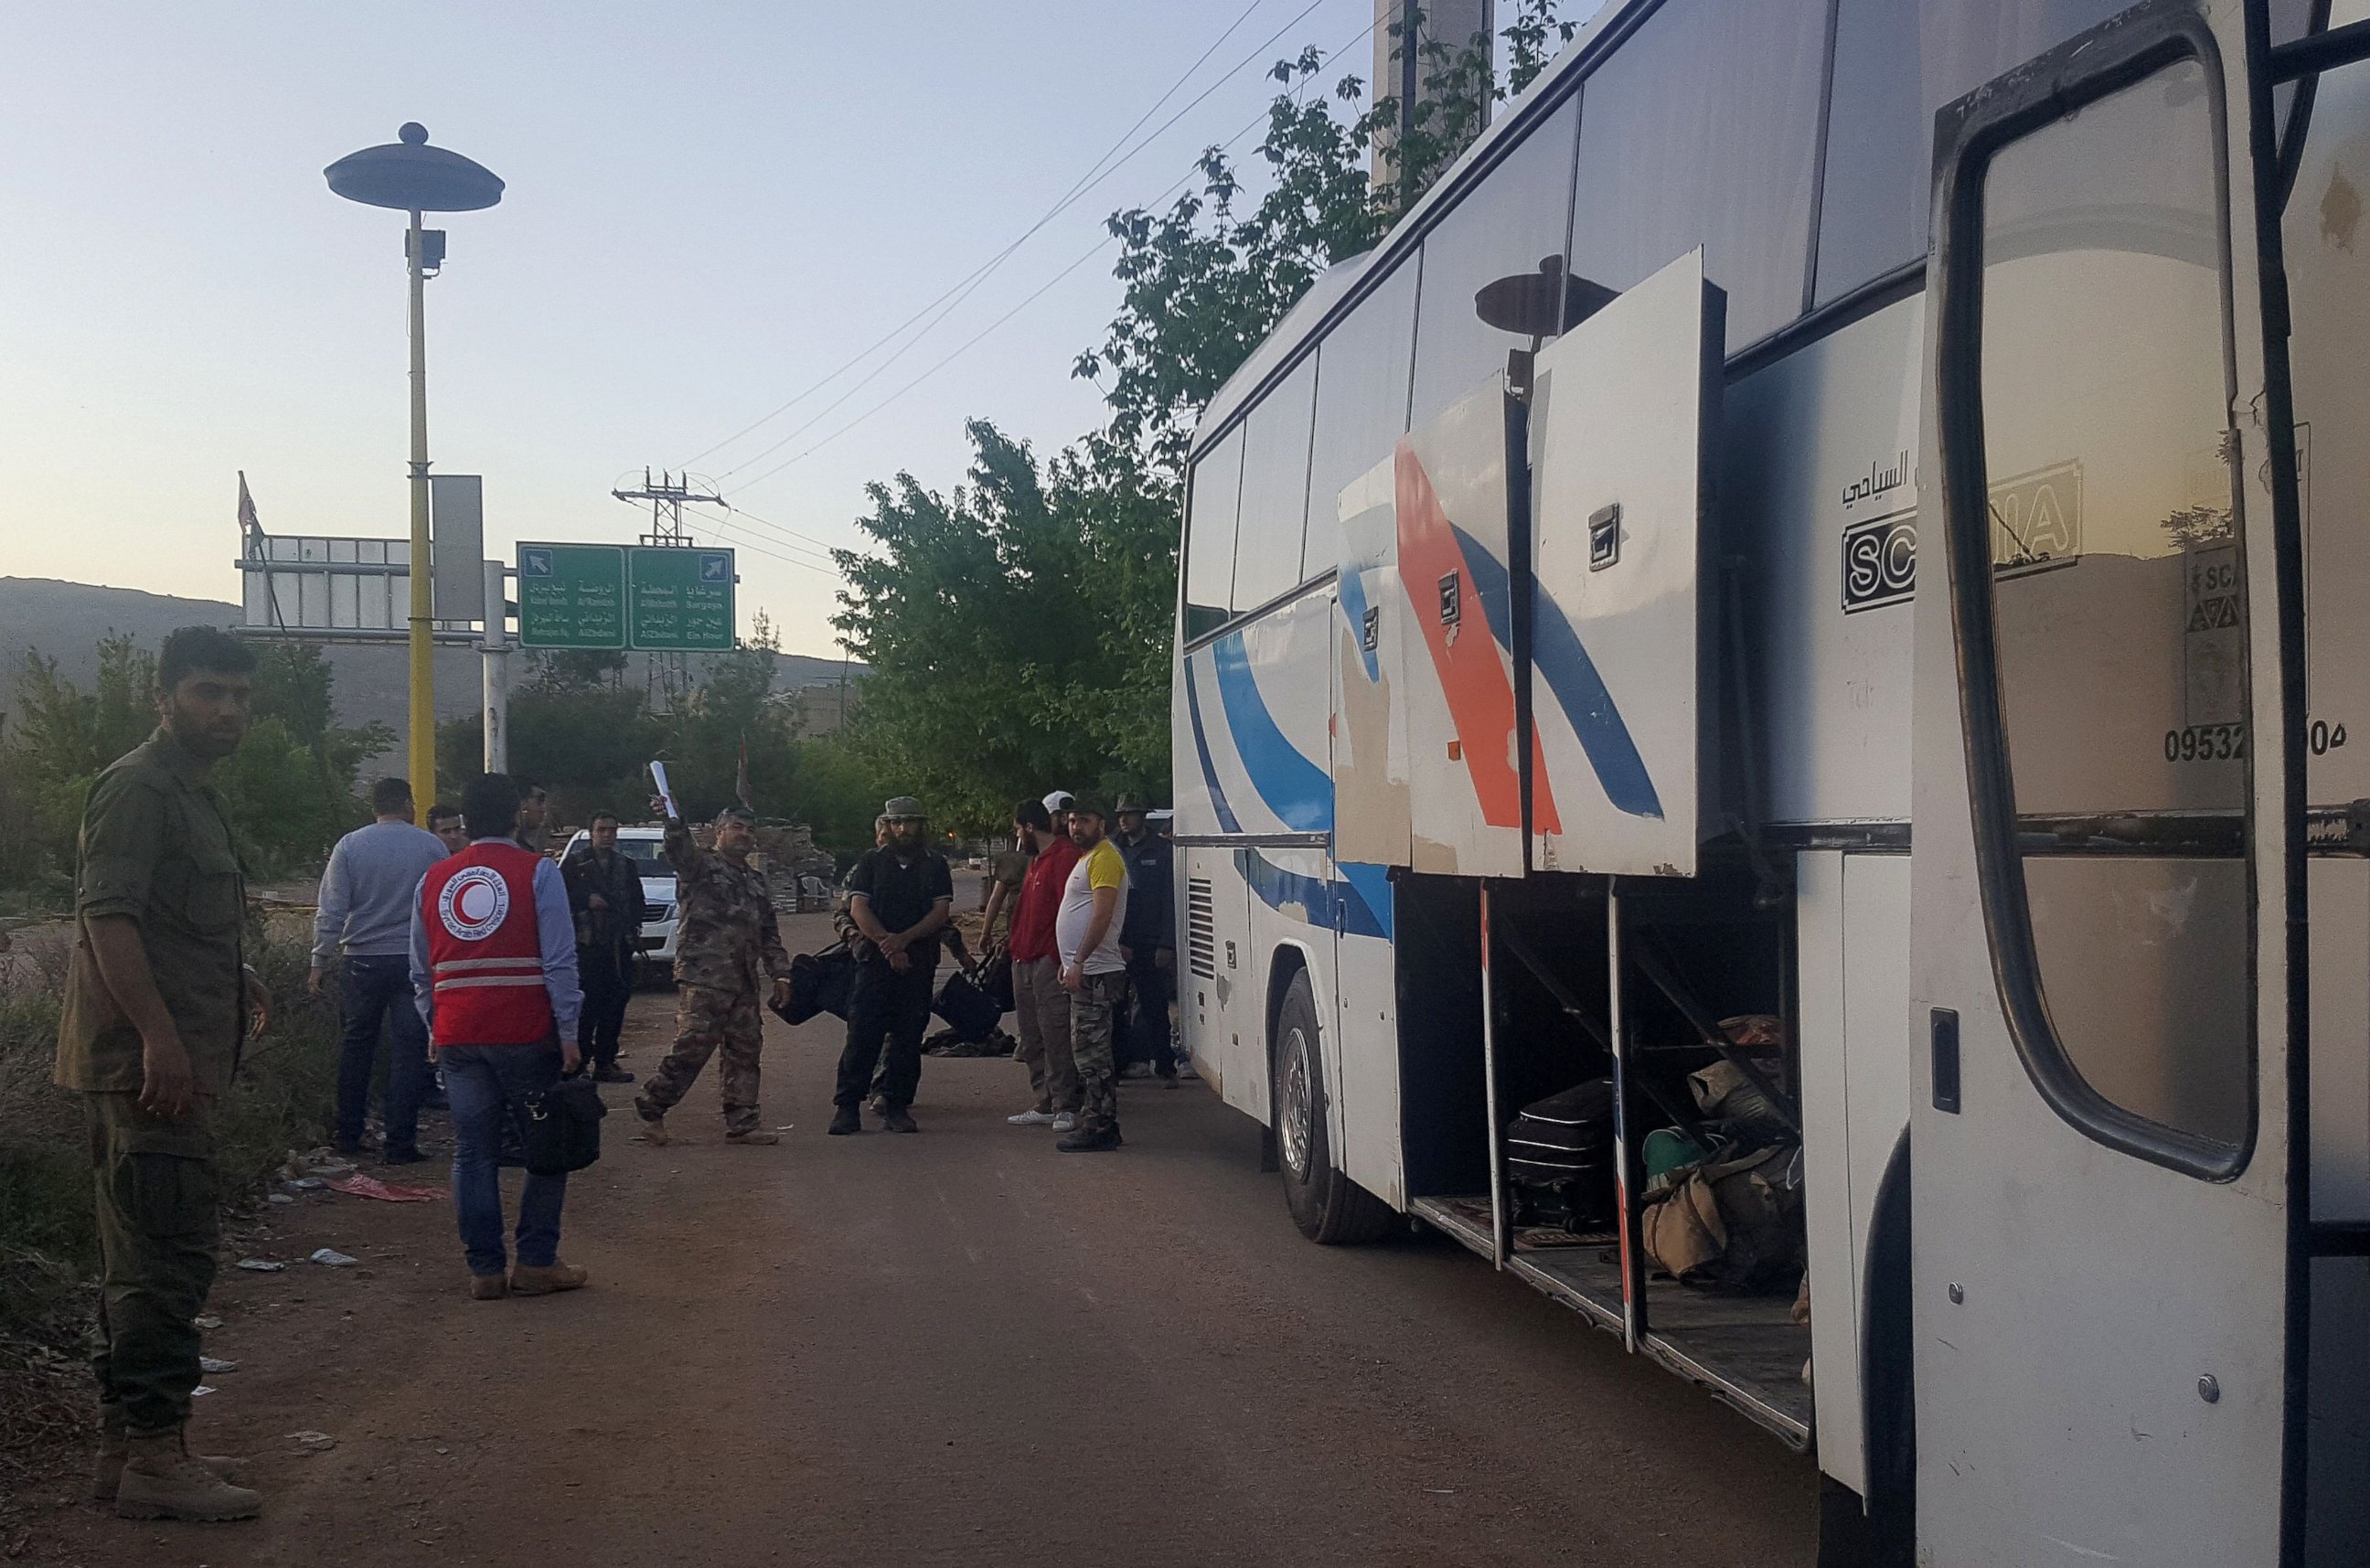 PHOTO: Syrians prepare to board a bus to leave the besieged town of Madaya, on April 20, 2016 during an operation to evacuate hundreds of wounded people from besieged Syrian towns.